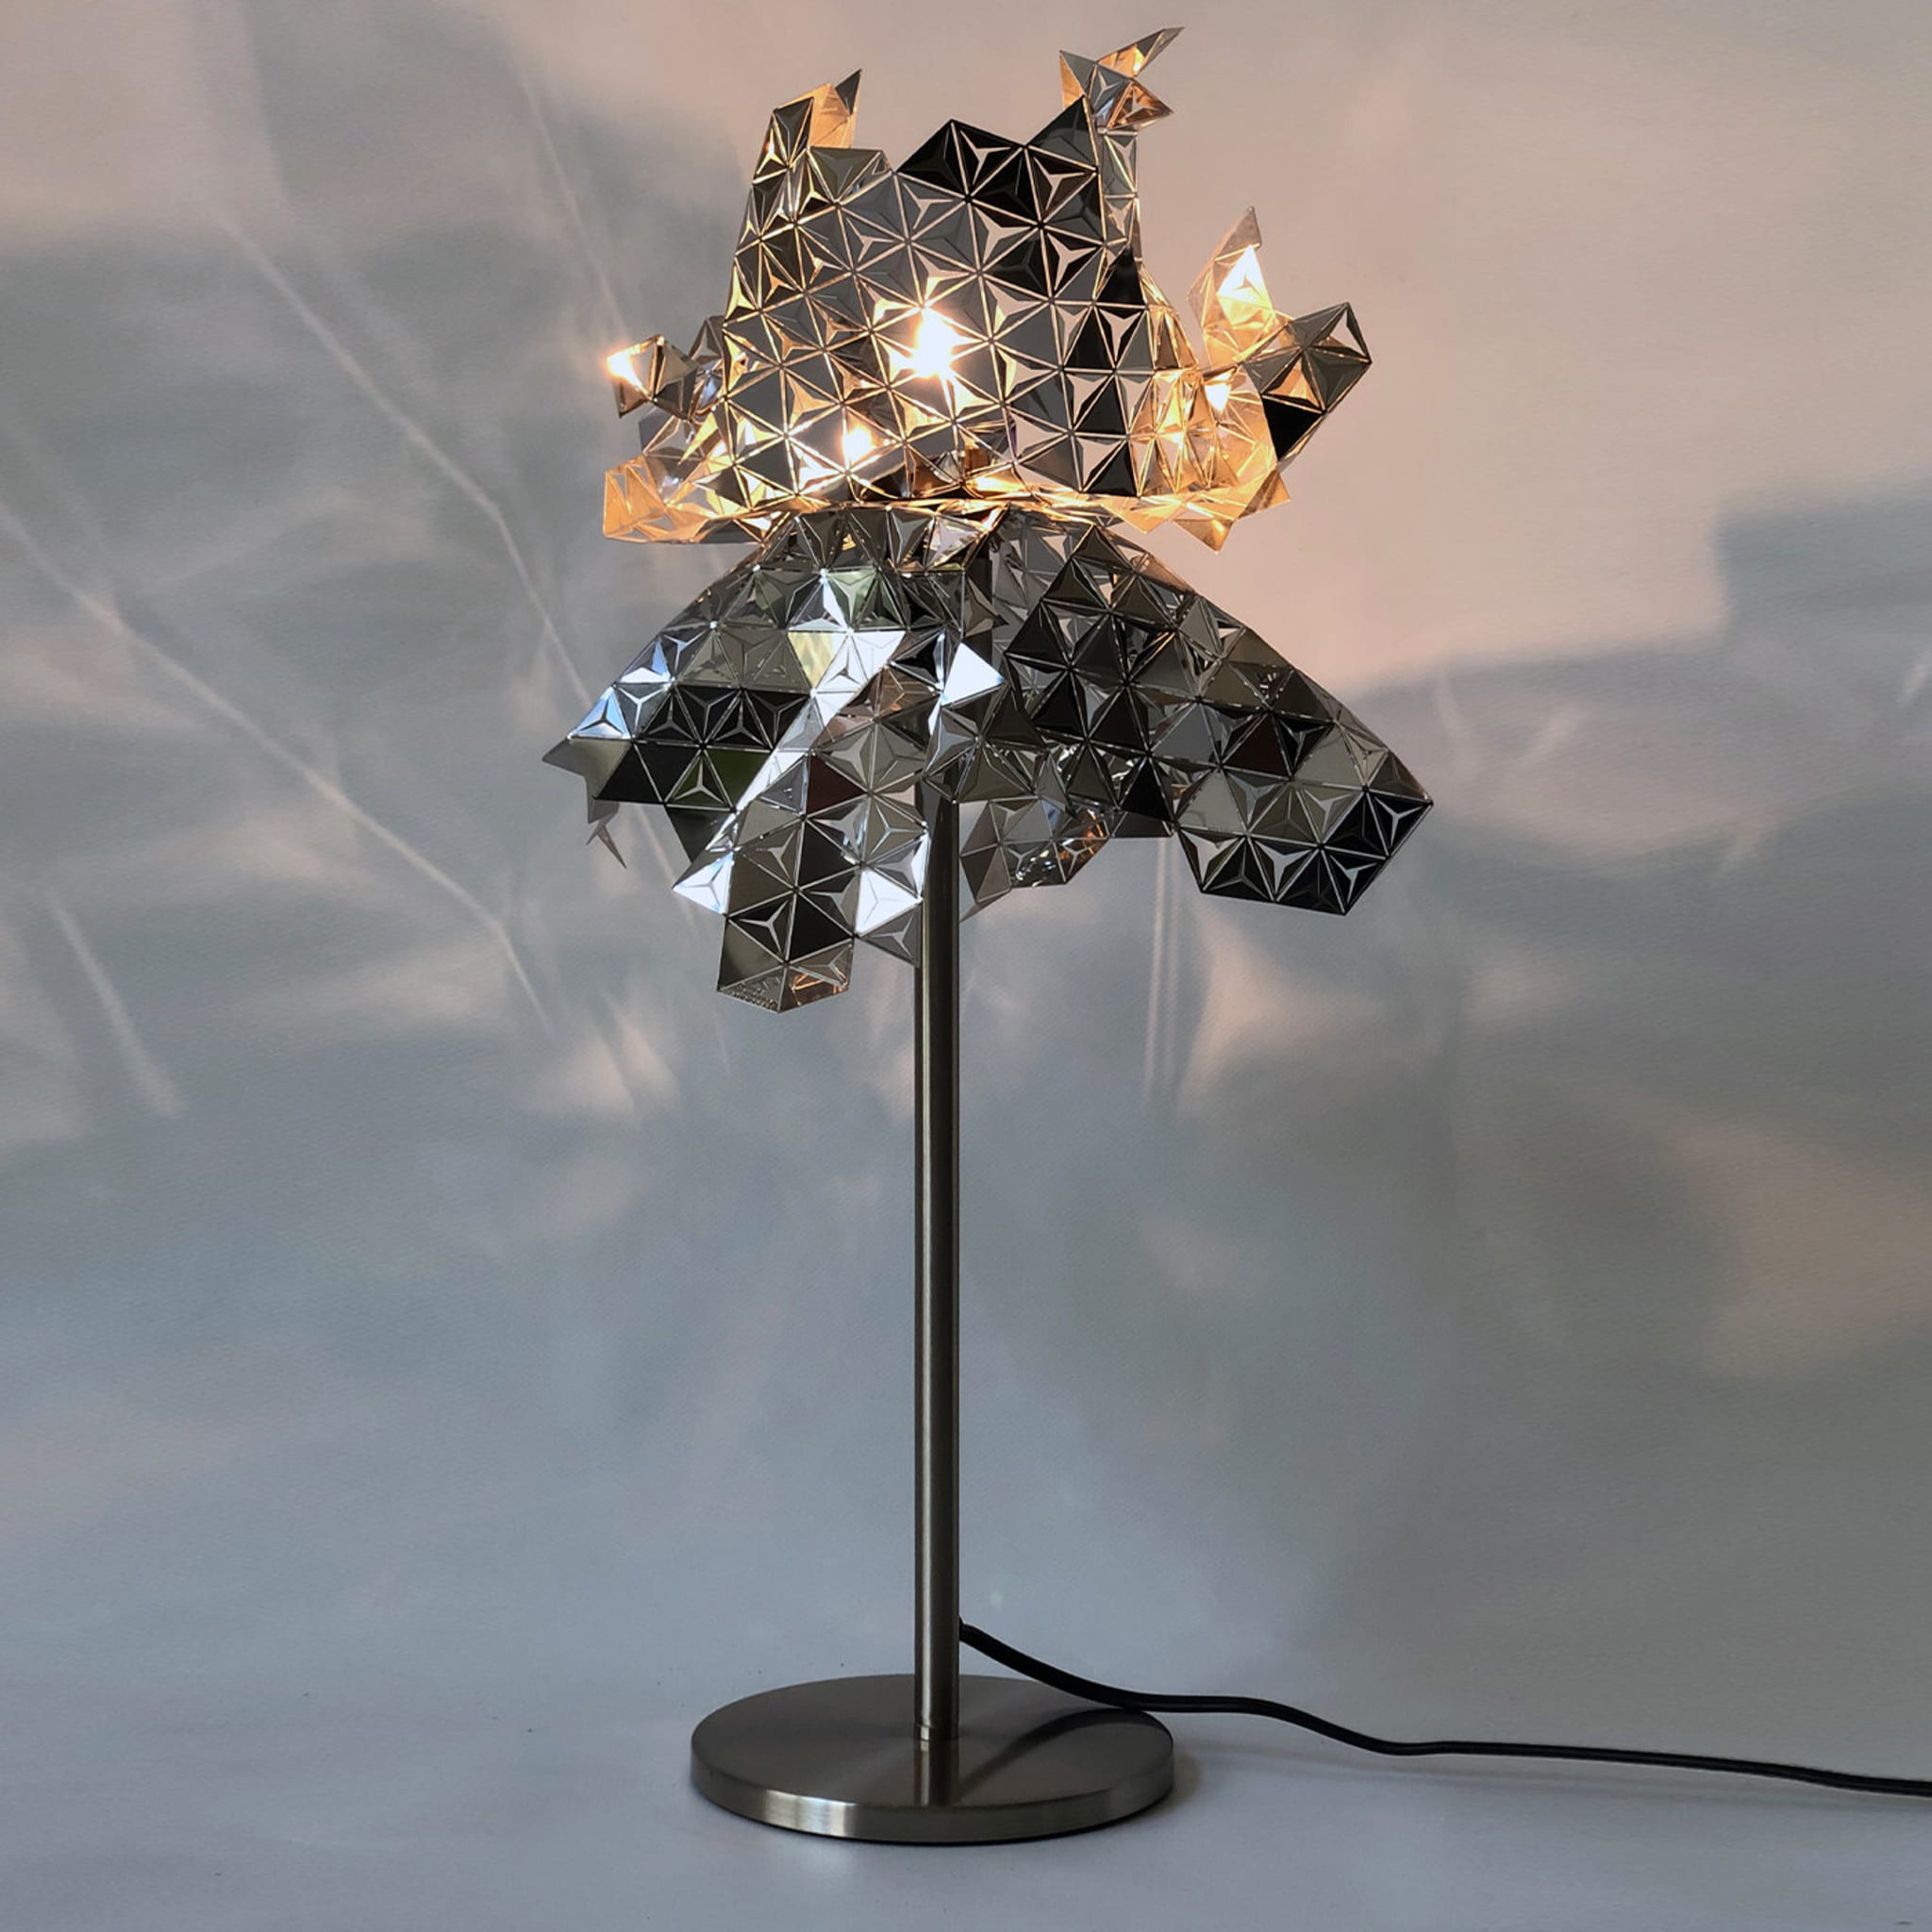 Scales S2 Steel Table Lamp  - Alternative view 2